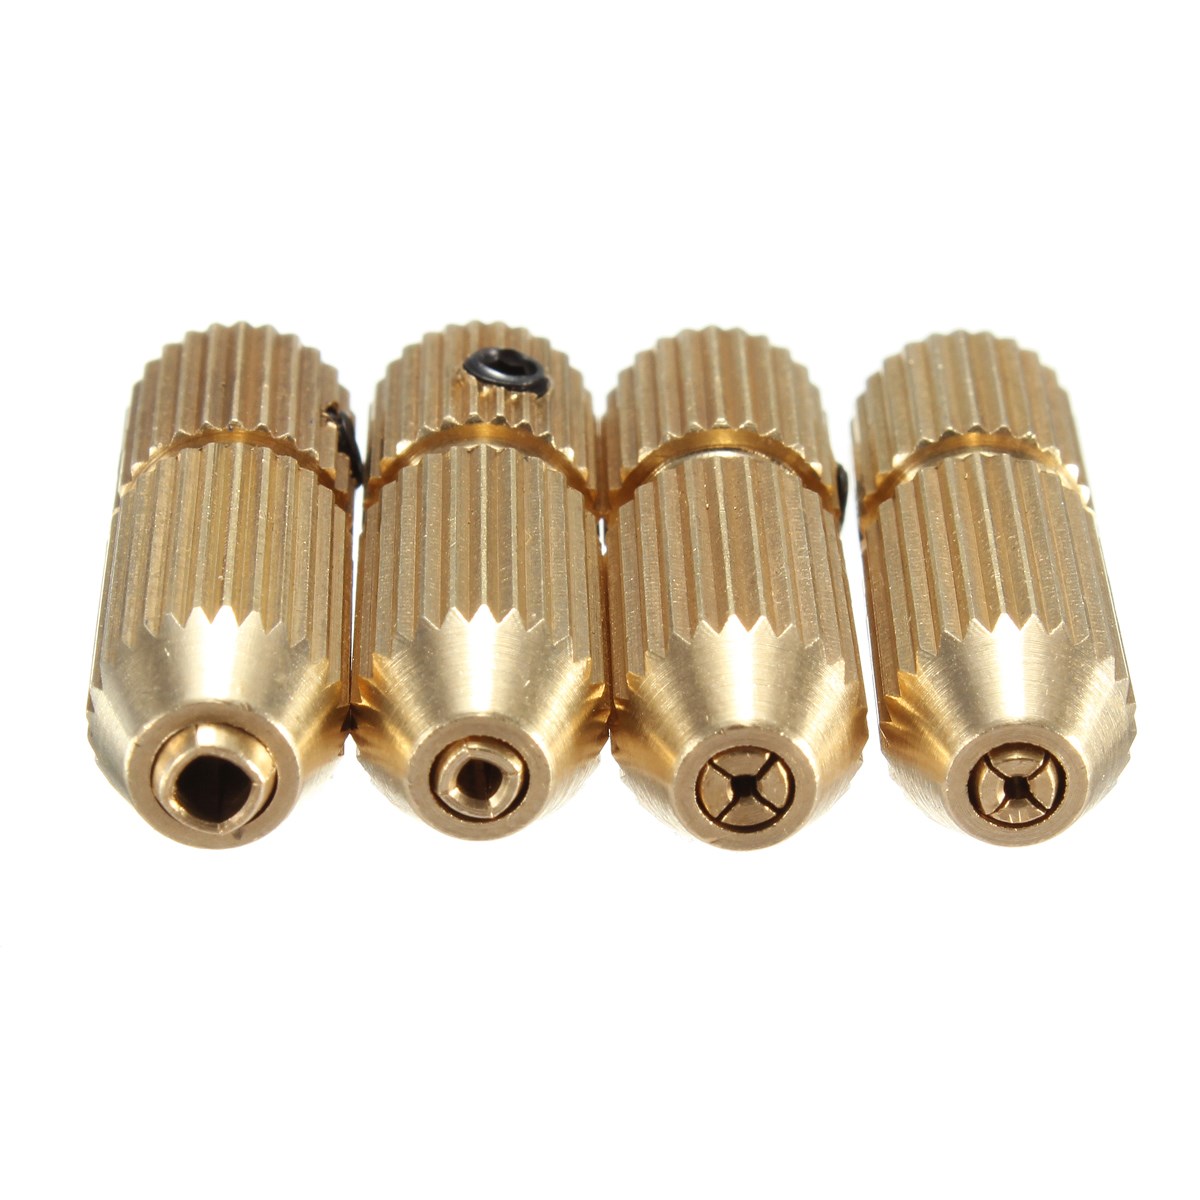 2 3mm Brass Electric Motor Shaft Clamp Fixture Chuck Mini Small For 0 7mm 3 2mm